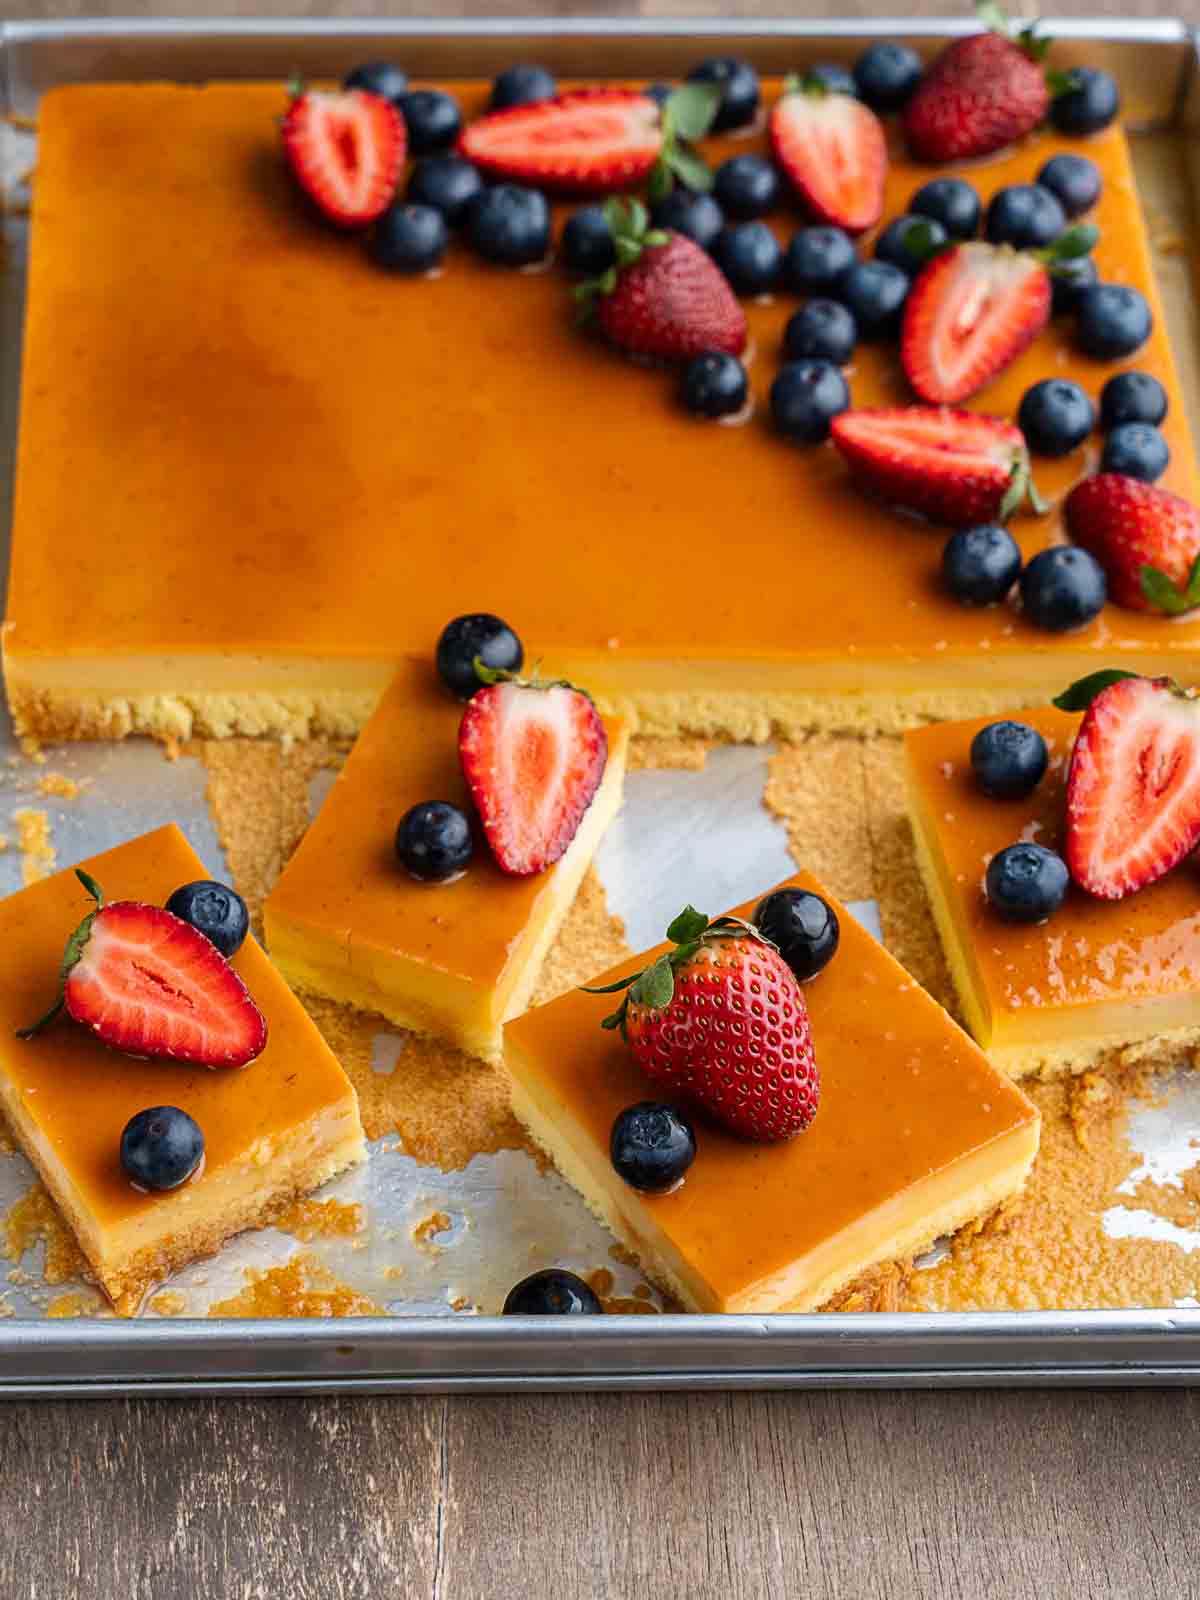 layers of cake made of custard or flan and chiffon cake topped with blueberries and strawberries.